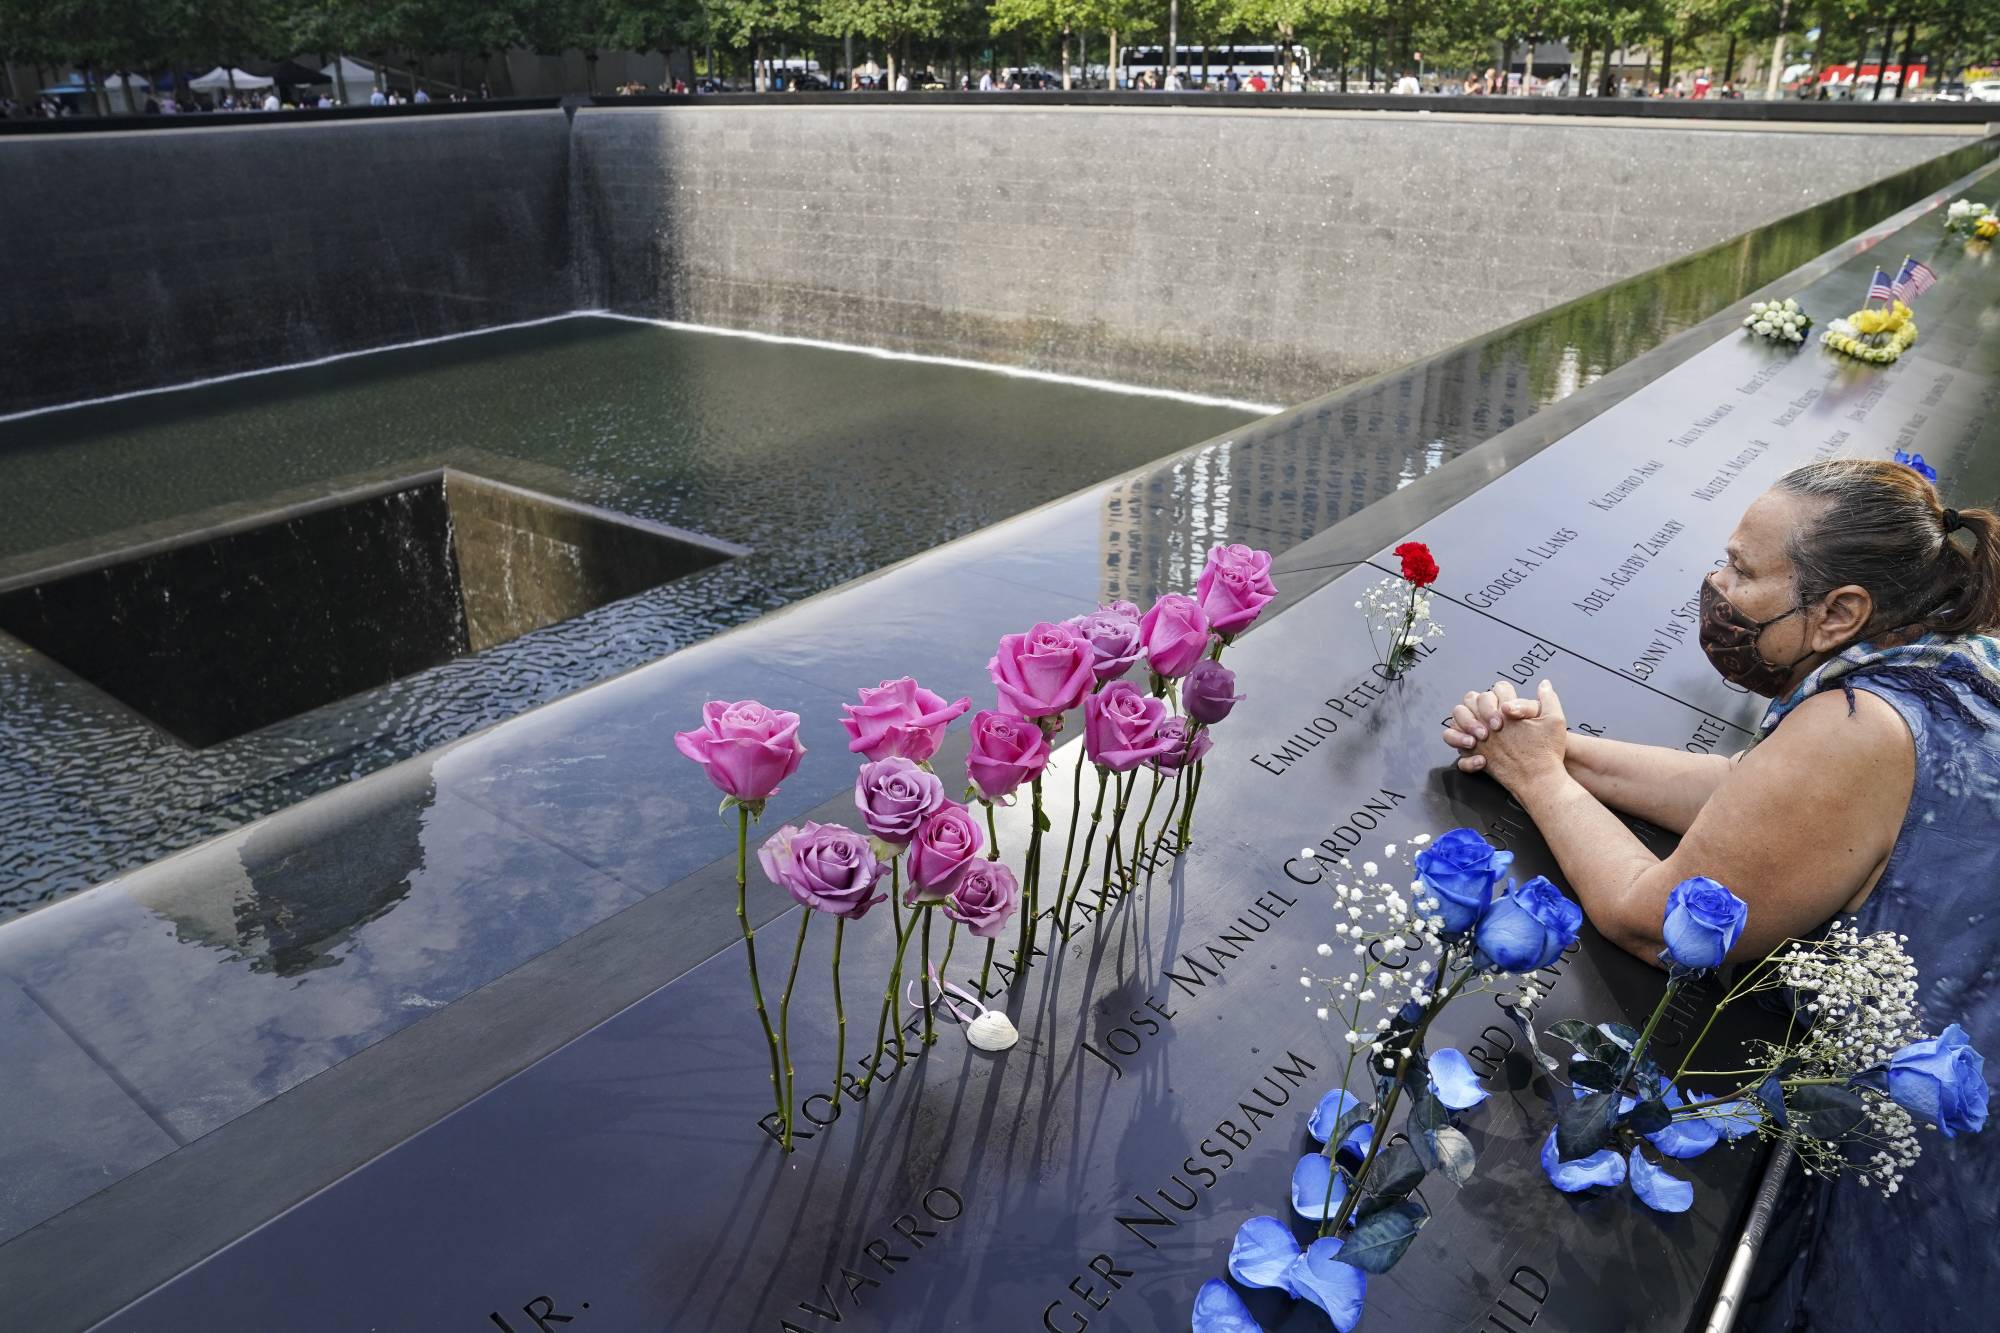 A mourner prays over the name cut-out of the deceased Emilio Pete Ortiz at the National September 11 Memorial and Museum, Friday, Sept. 11, 2020, in New York. Americans will commemorate 9/11 with tributes that have been altered by coronavirus precautions and woven into the presidential campaign. (AP Photo/John Minchillo)